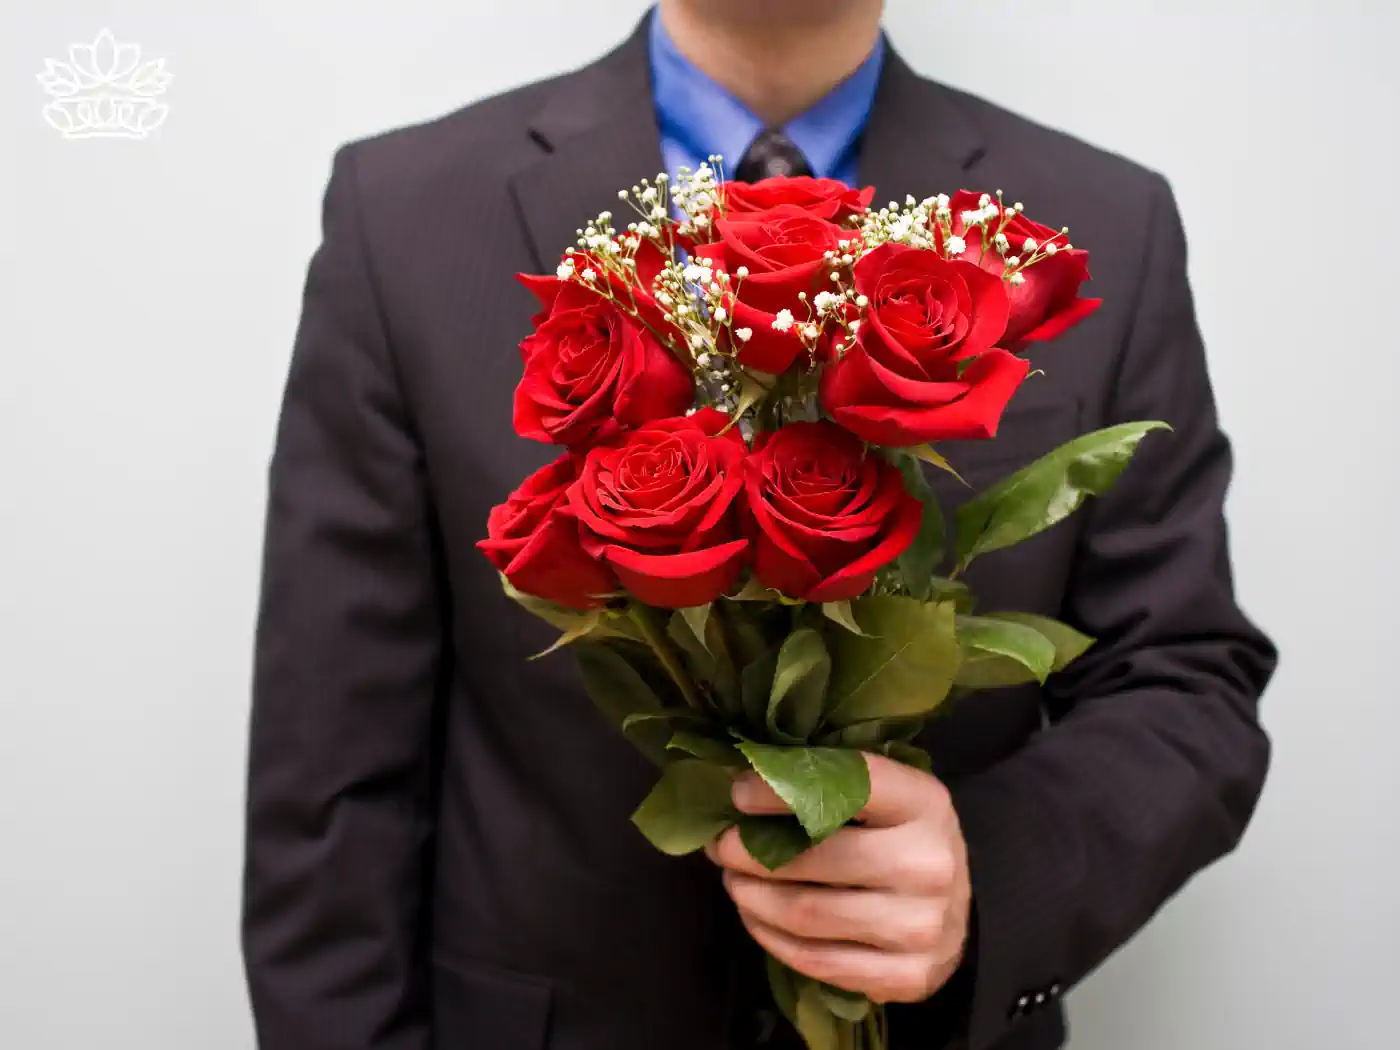 Gentleman in a suit holding a bouquet of vibrant red roses with baby's breath, embodying sophistication and affection with flower bouquets under R500, thoughtfully delivered by Fabulous Flowers and Gifts.